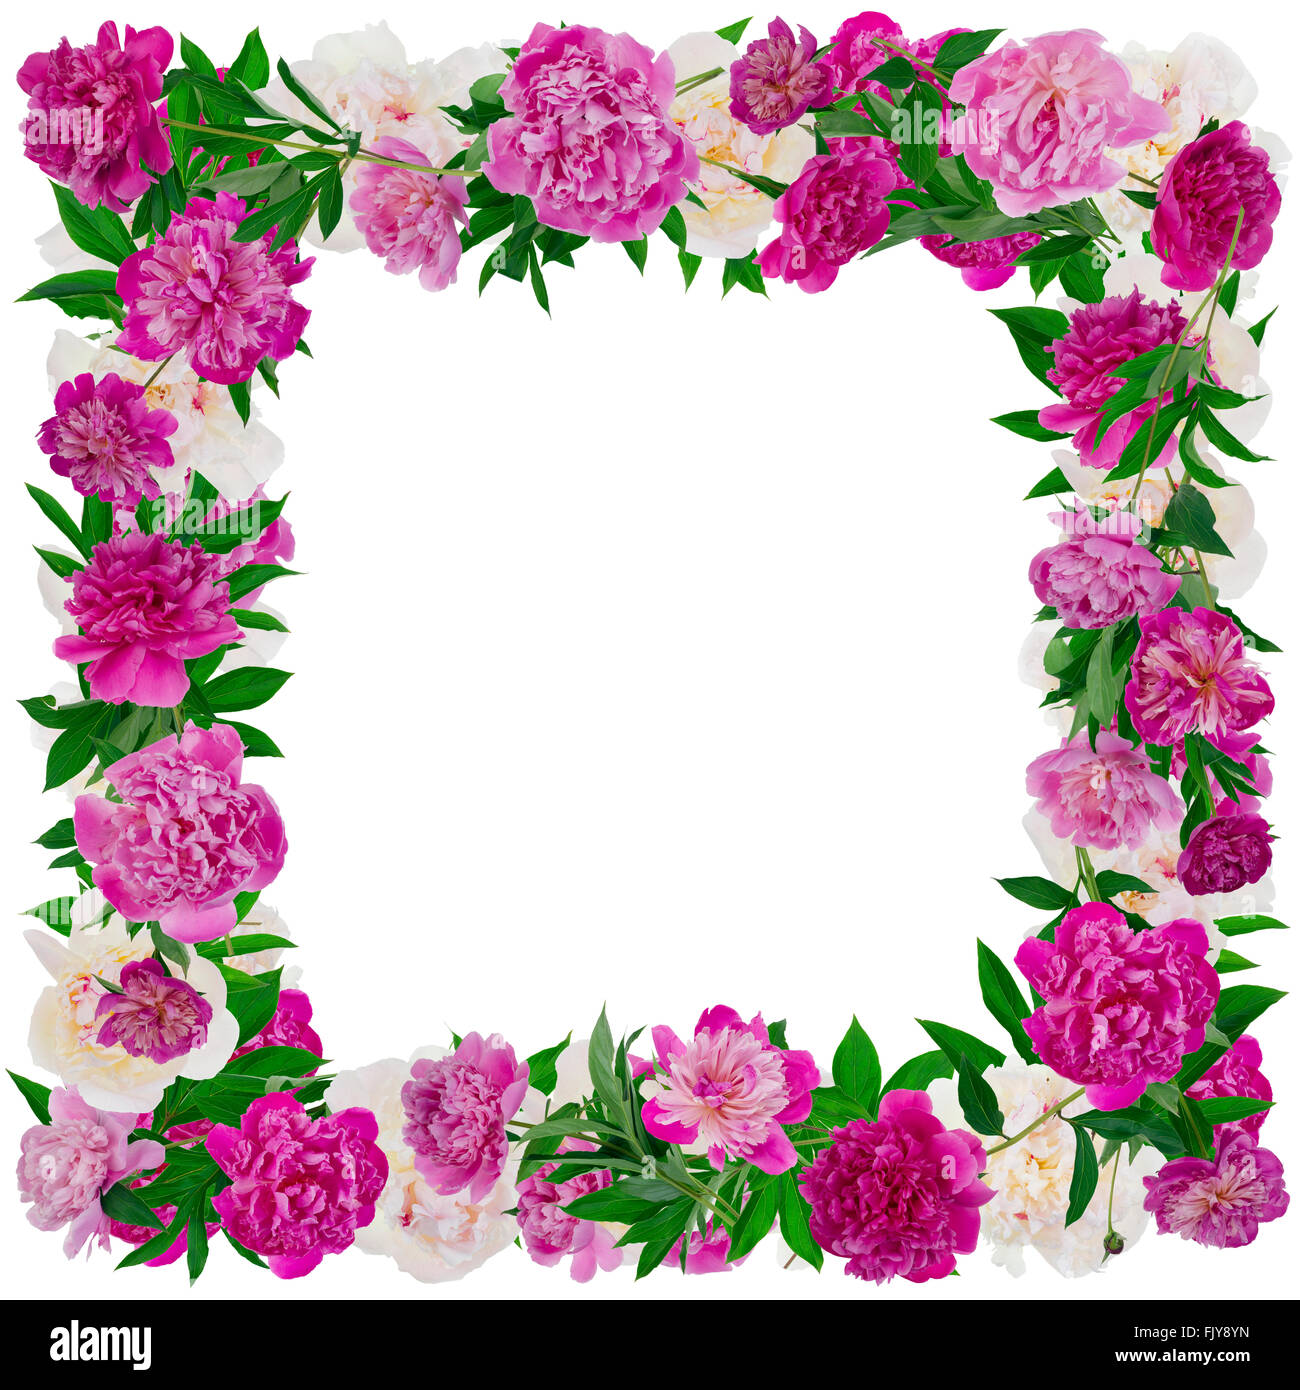 Home Decor A4 Frame Handmade Picture Real Flowers Dried Flowers